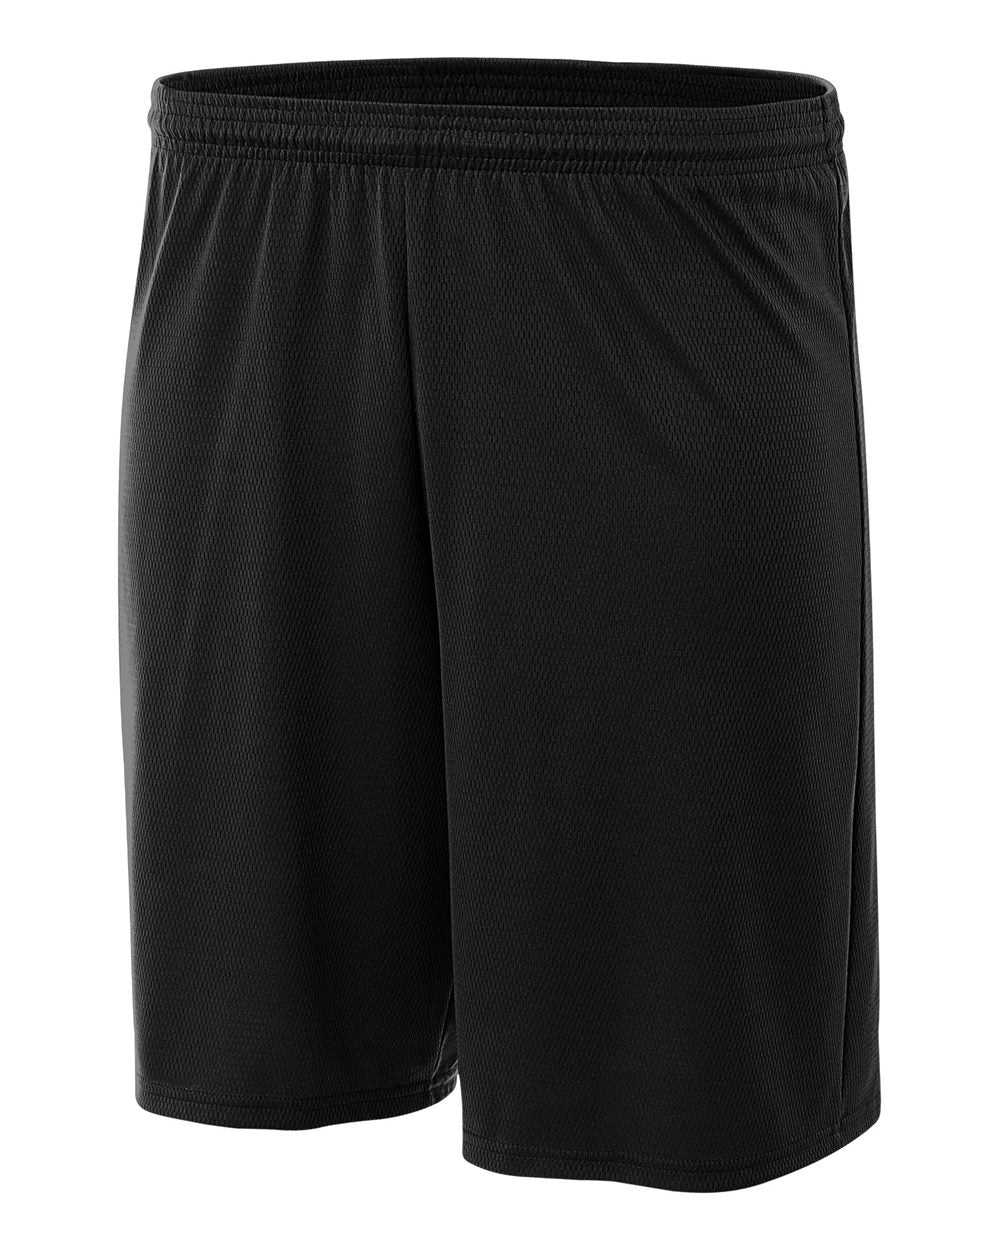 A4, A4 N5281 9" Cooling Performance Power Mesh Practice Short - Black